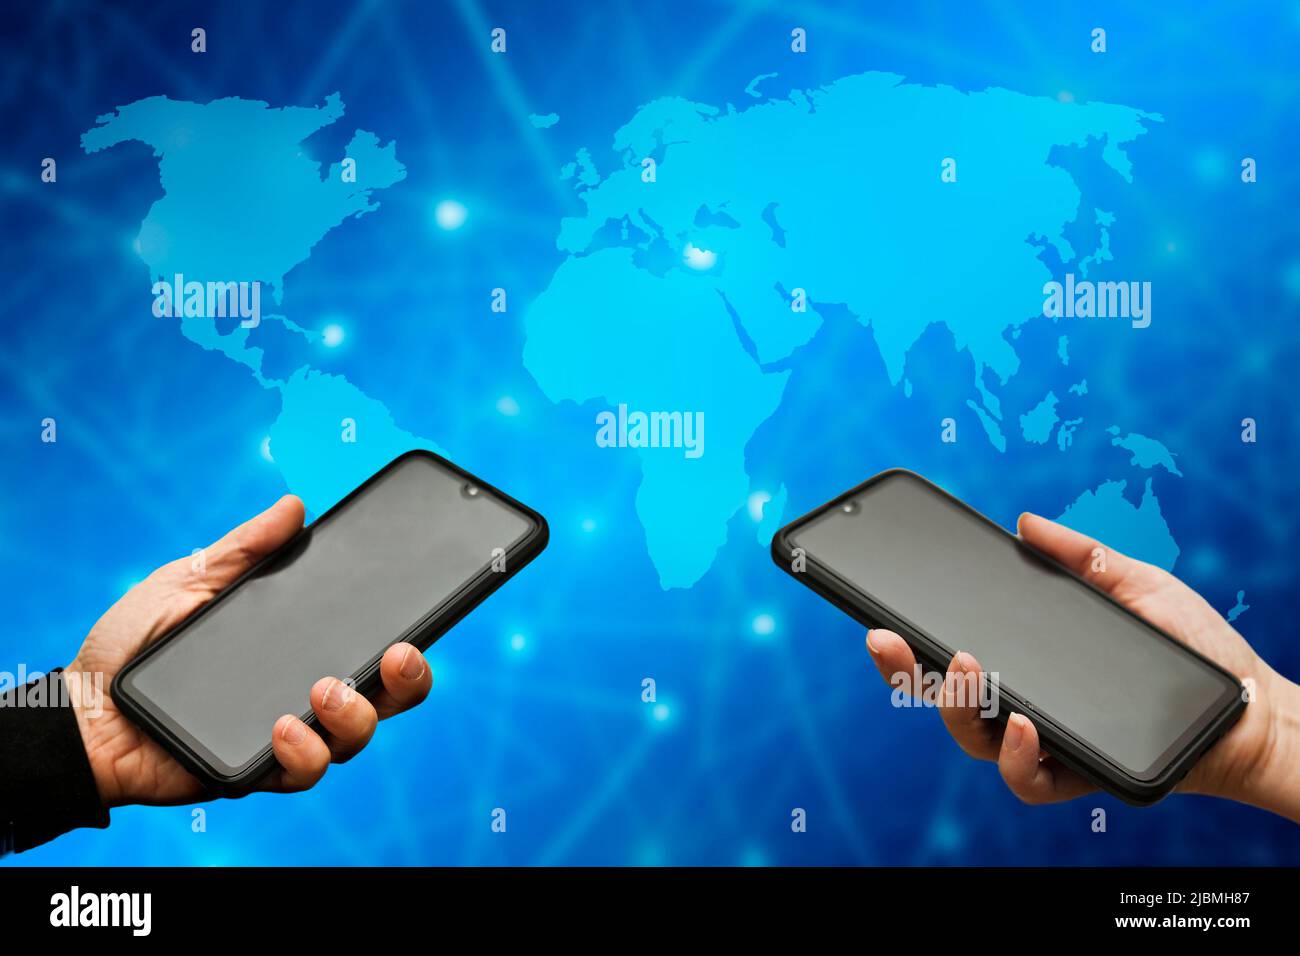 hands holding smartphones and map of world, global communication concept Stock Photo